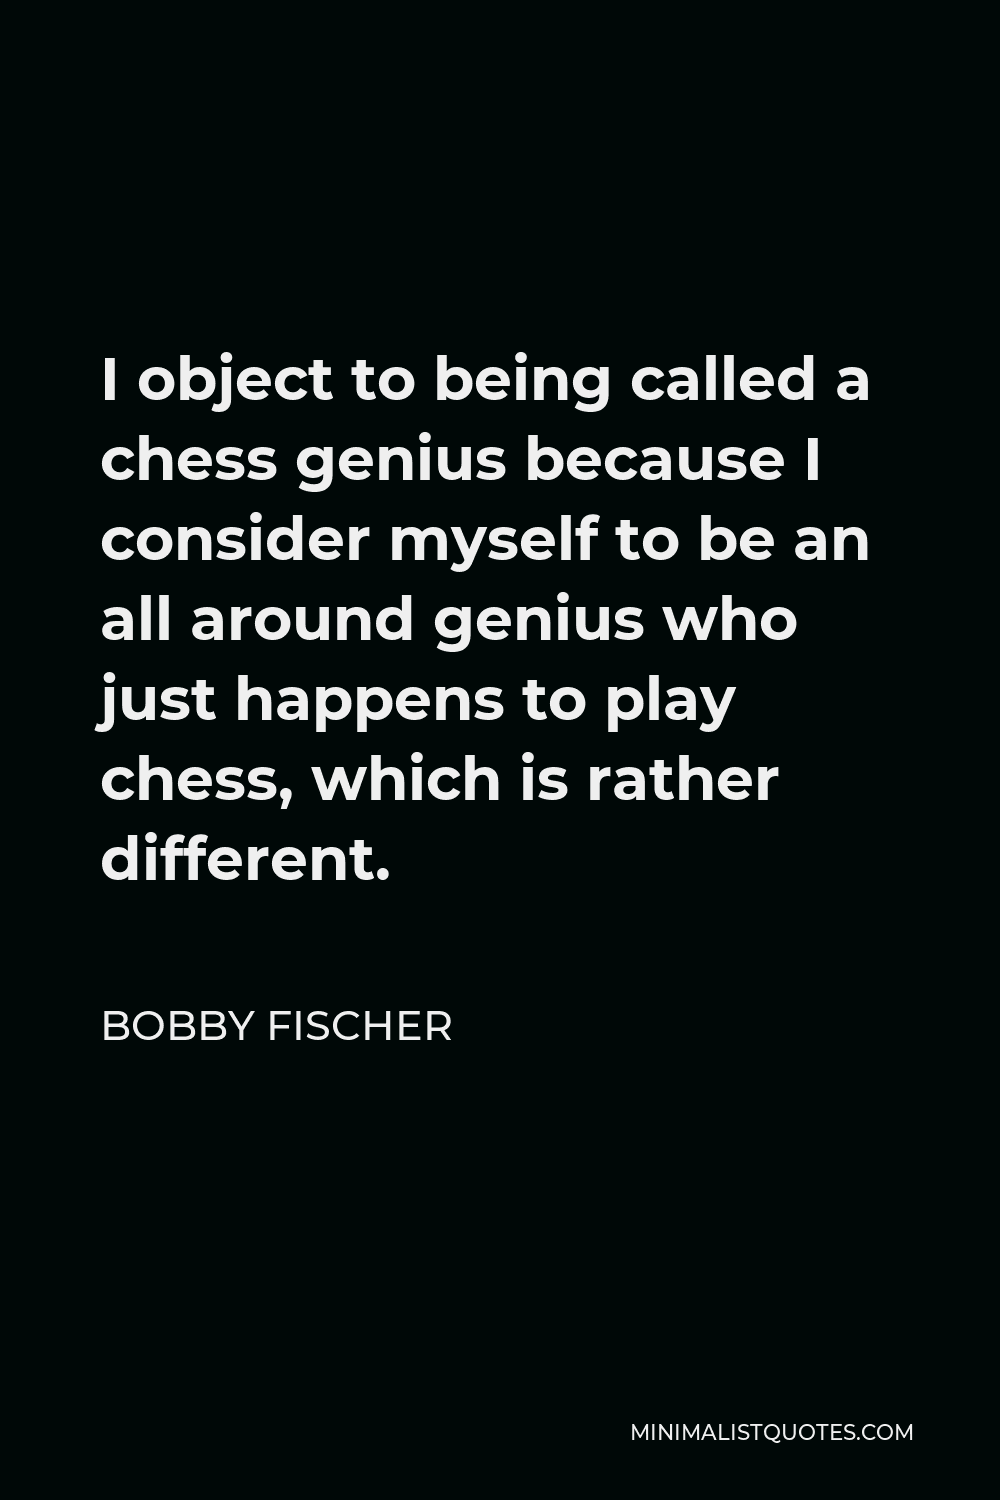 Bobby Fischer Quote - I object to being called a chess genius because I consider myself to be an all around genius who just happens to play chess, which is rather different.